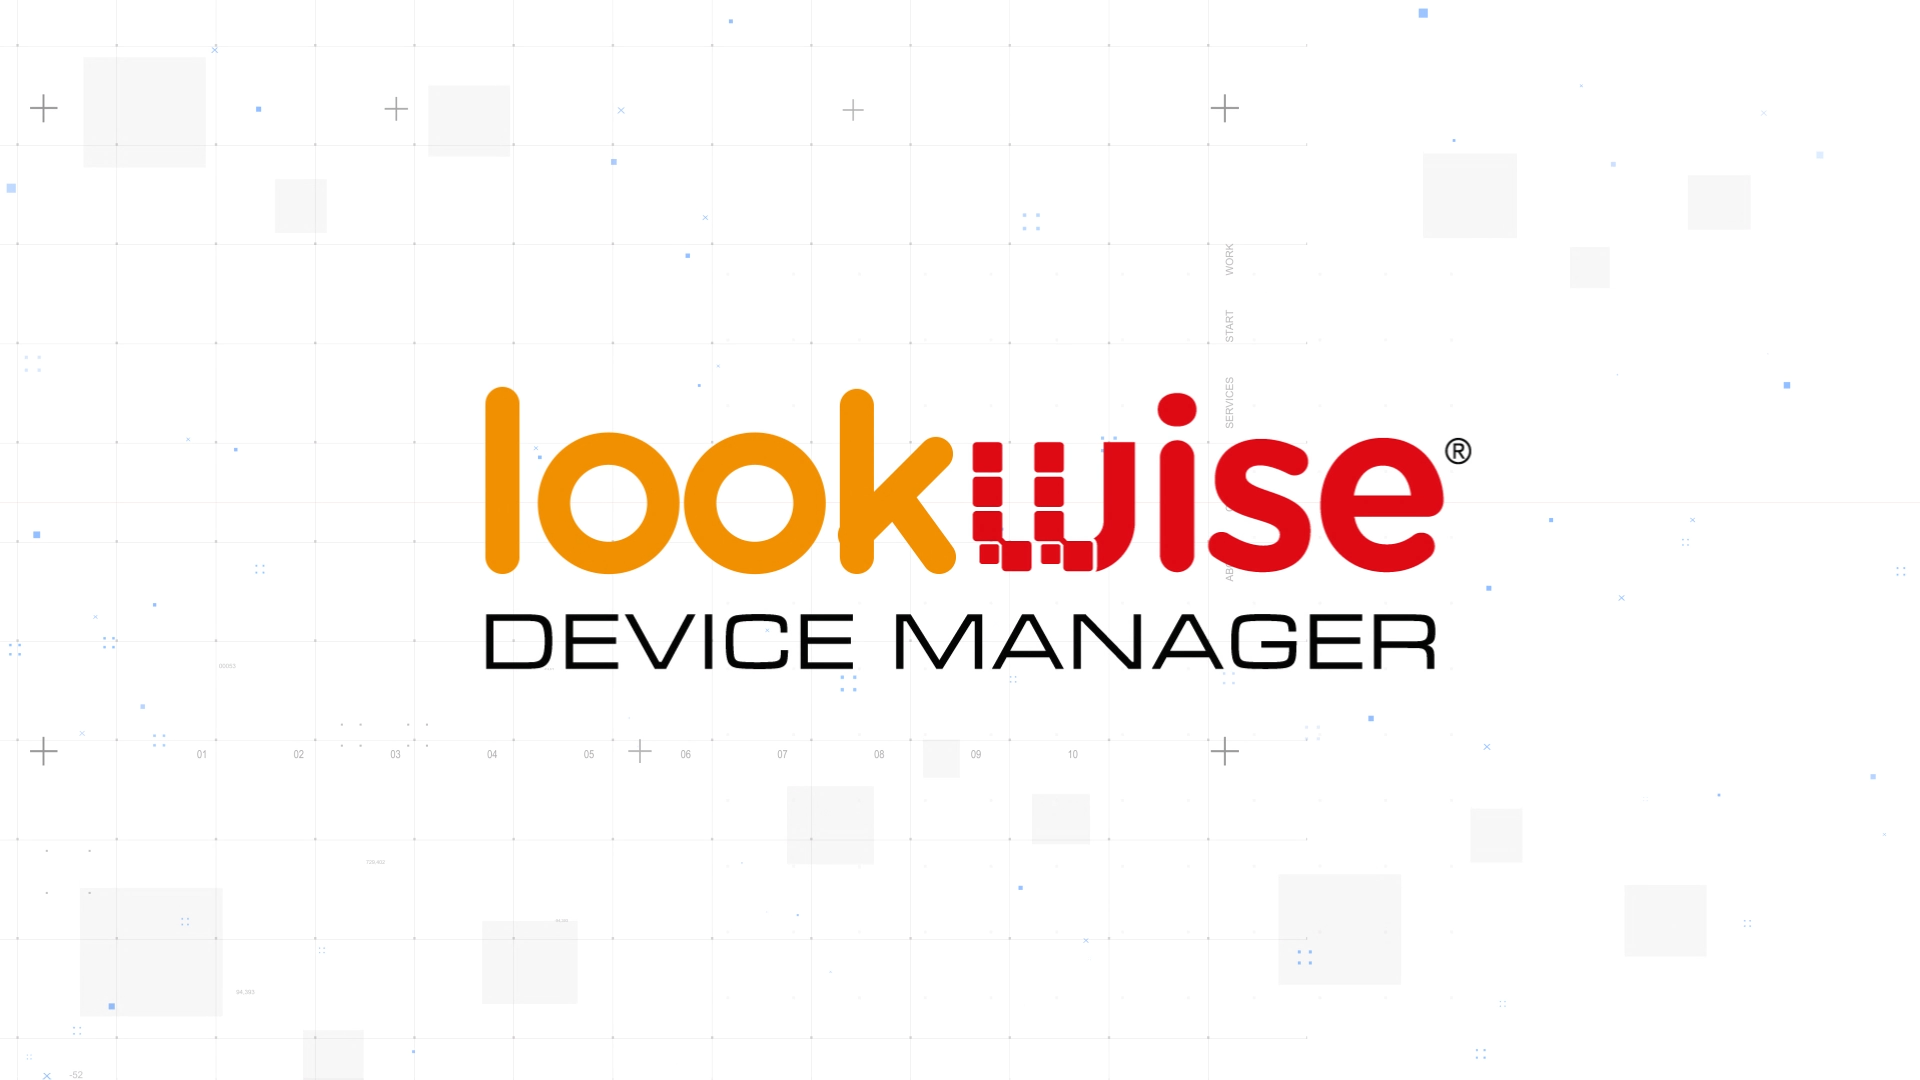 Lookwise Device Manager